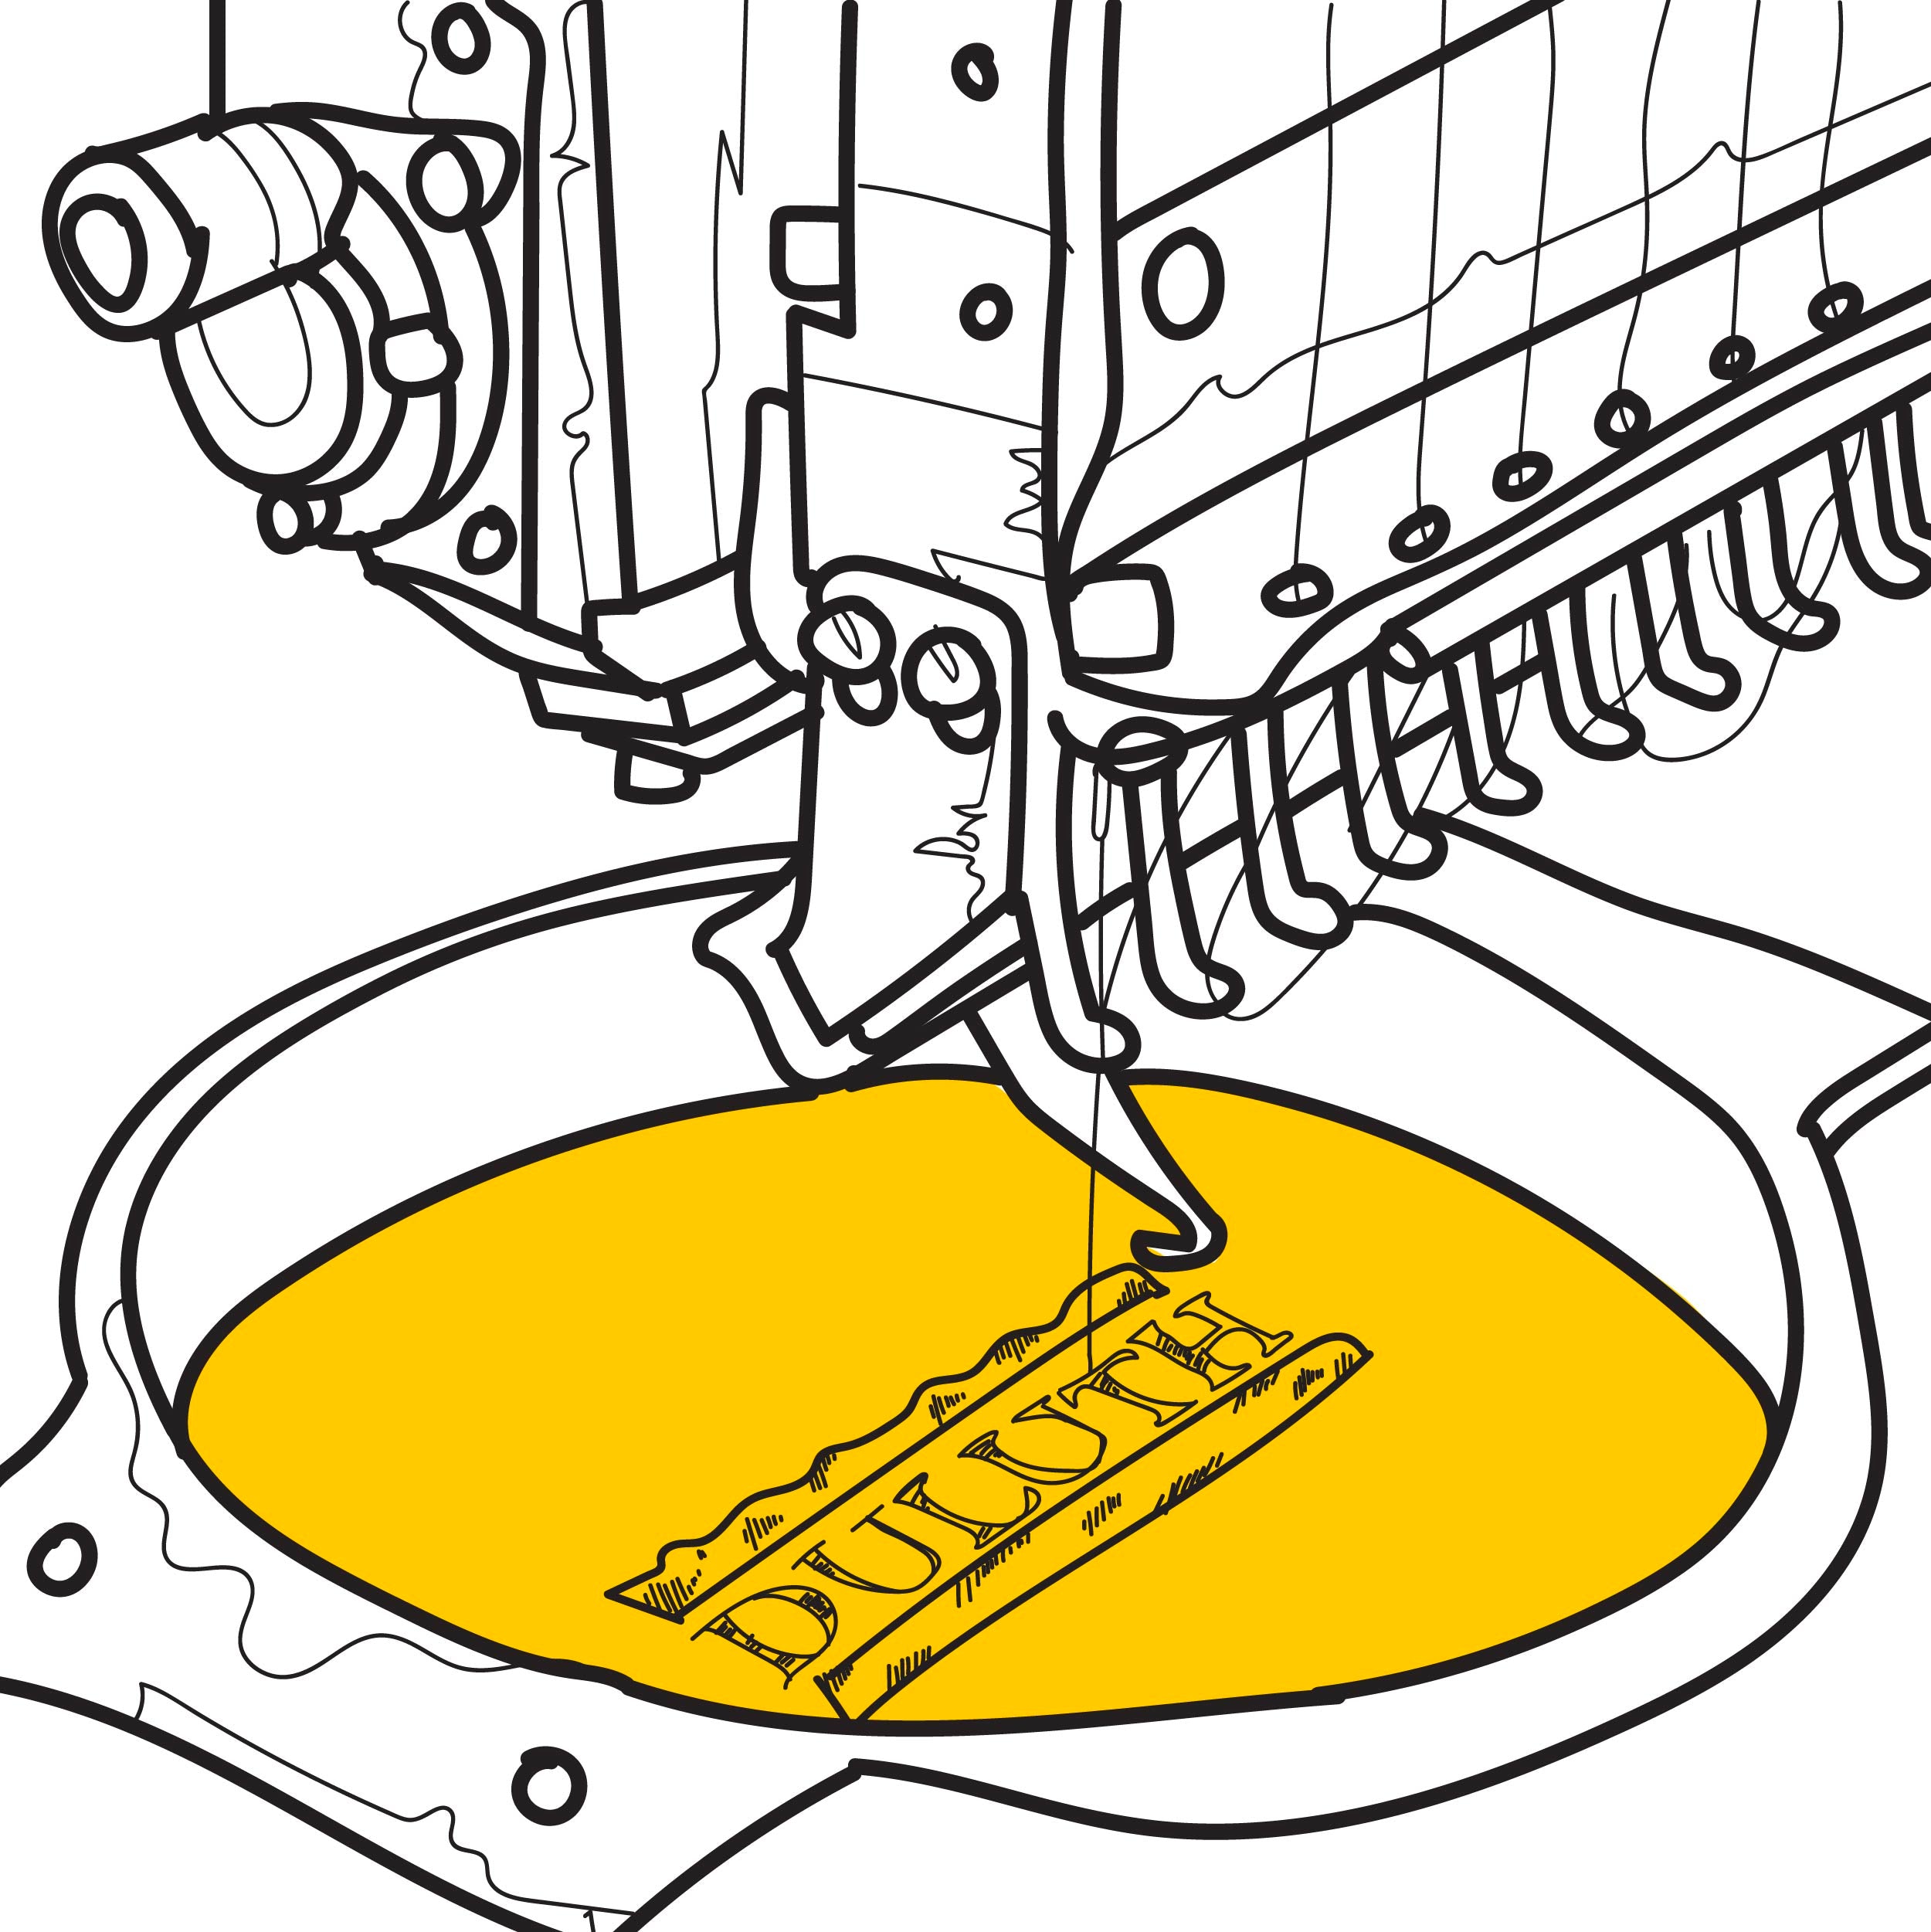 Illustration of embroidery machine sewing The City of Duluth's Logo onto a garment.